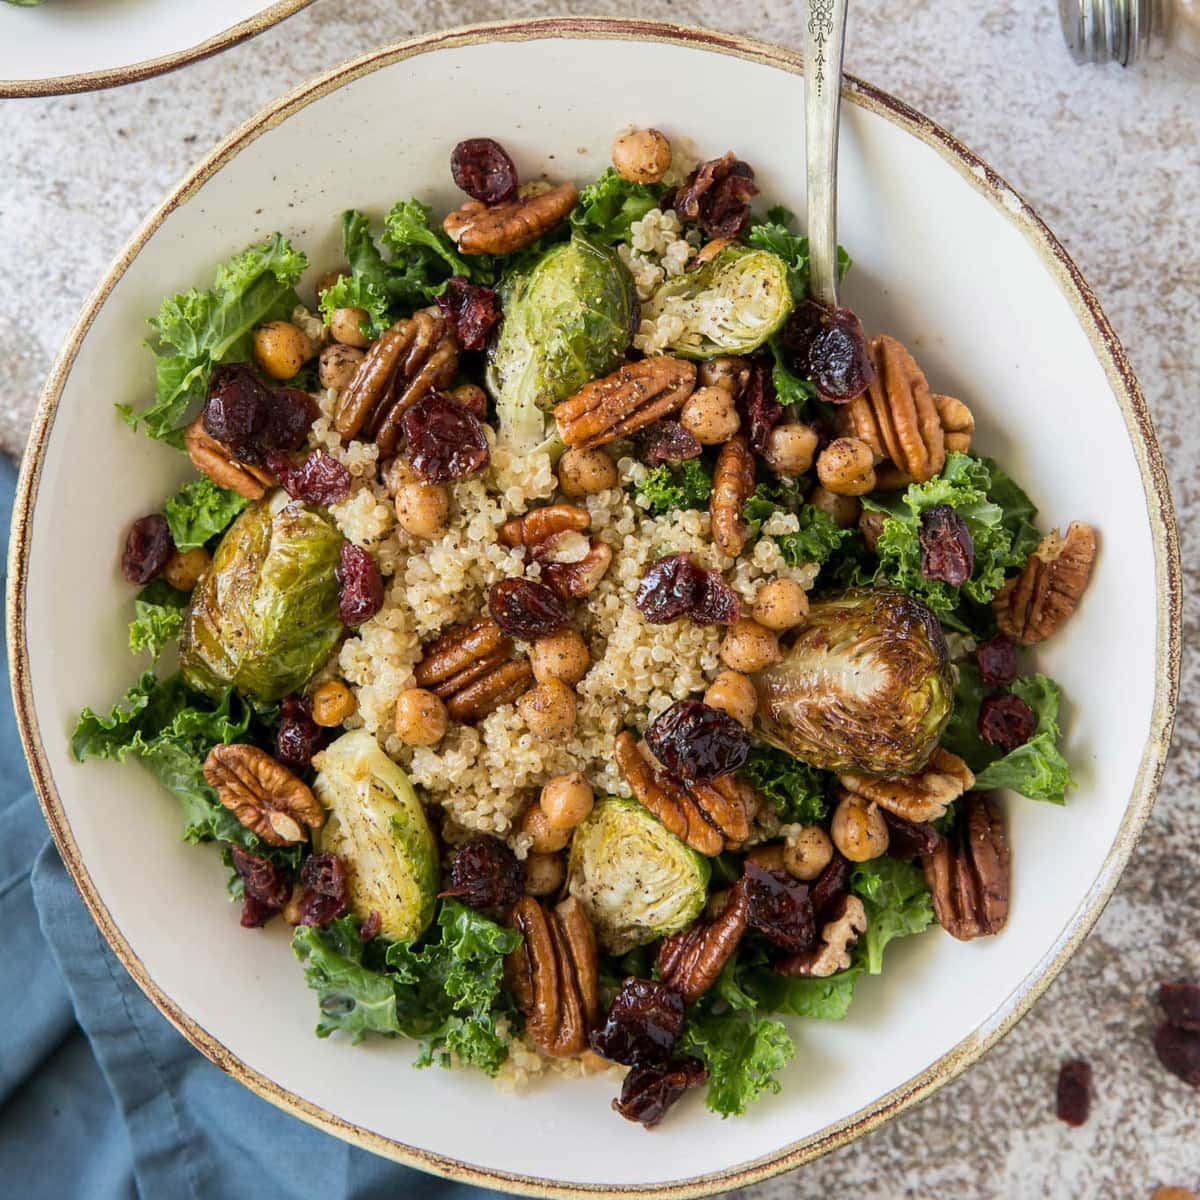 Kale Salad with Quinoa and Chickpeas